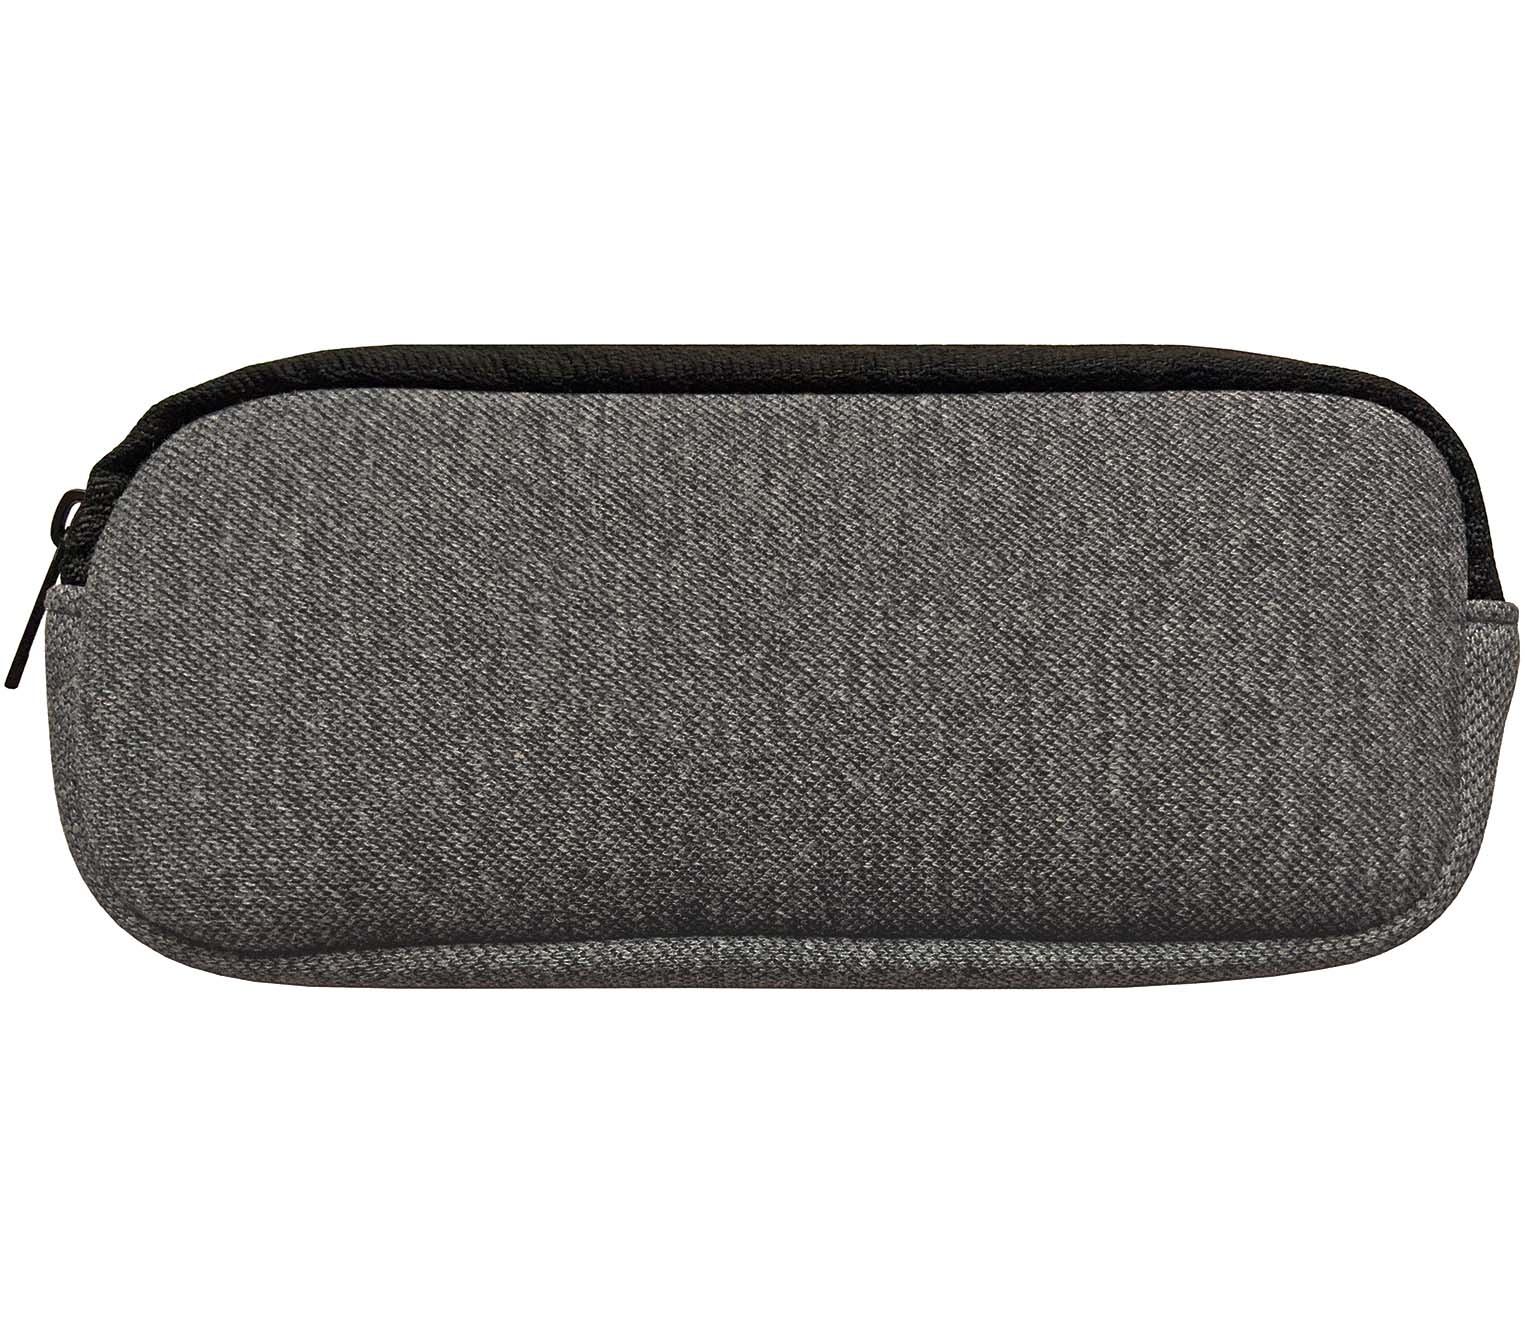 Main Image (Angle) - Kit (Grey) Glasses Cases Accessories